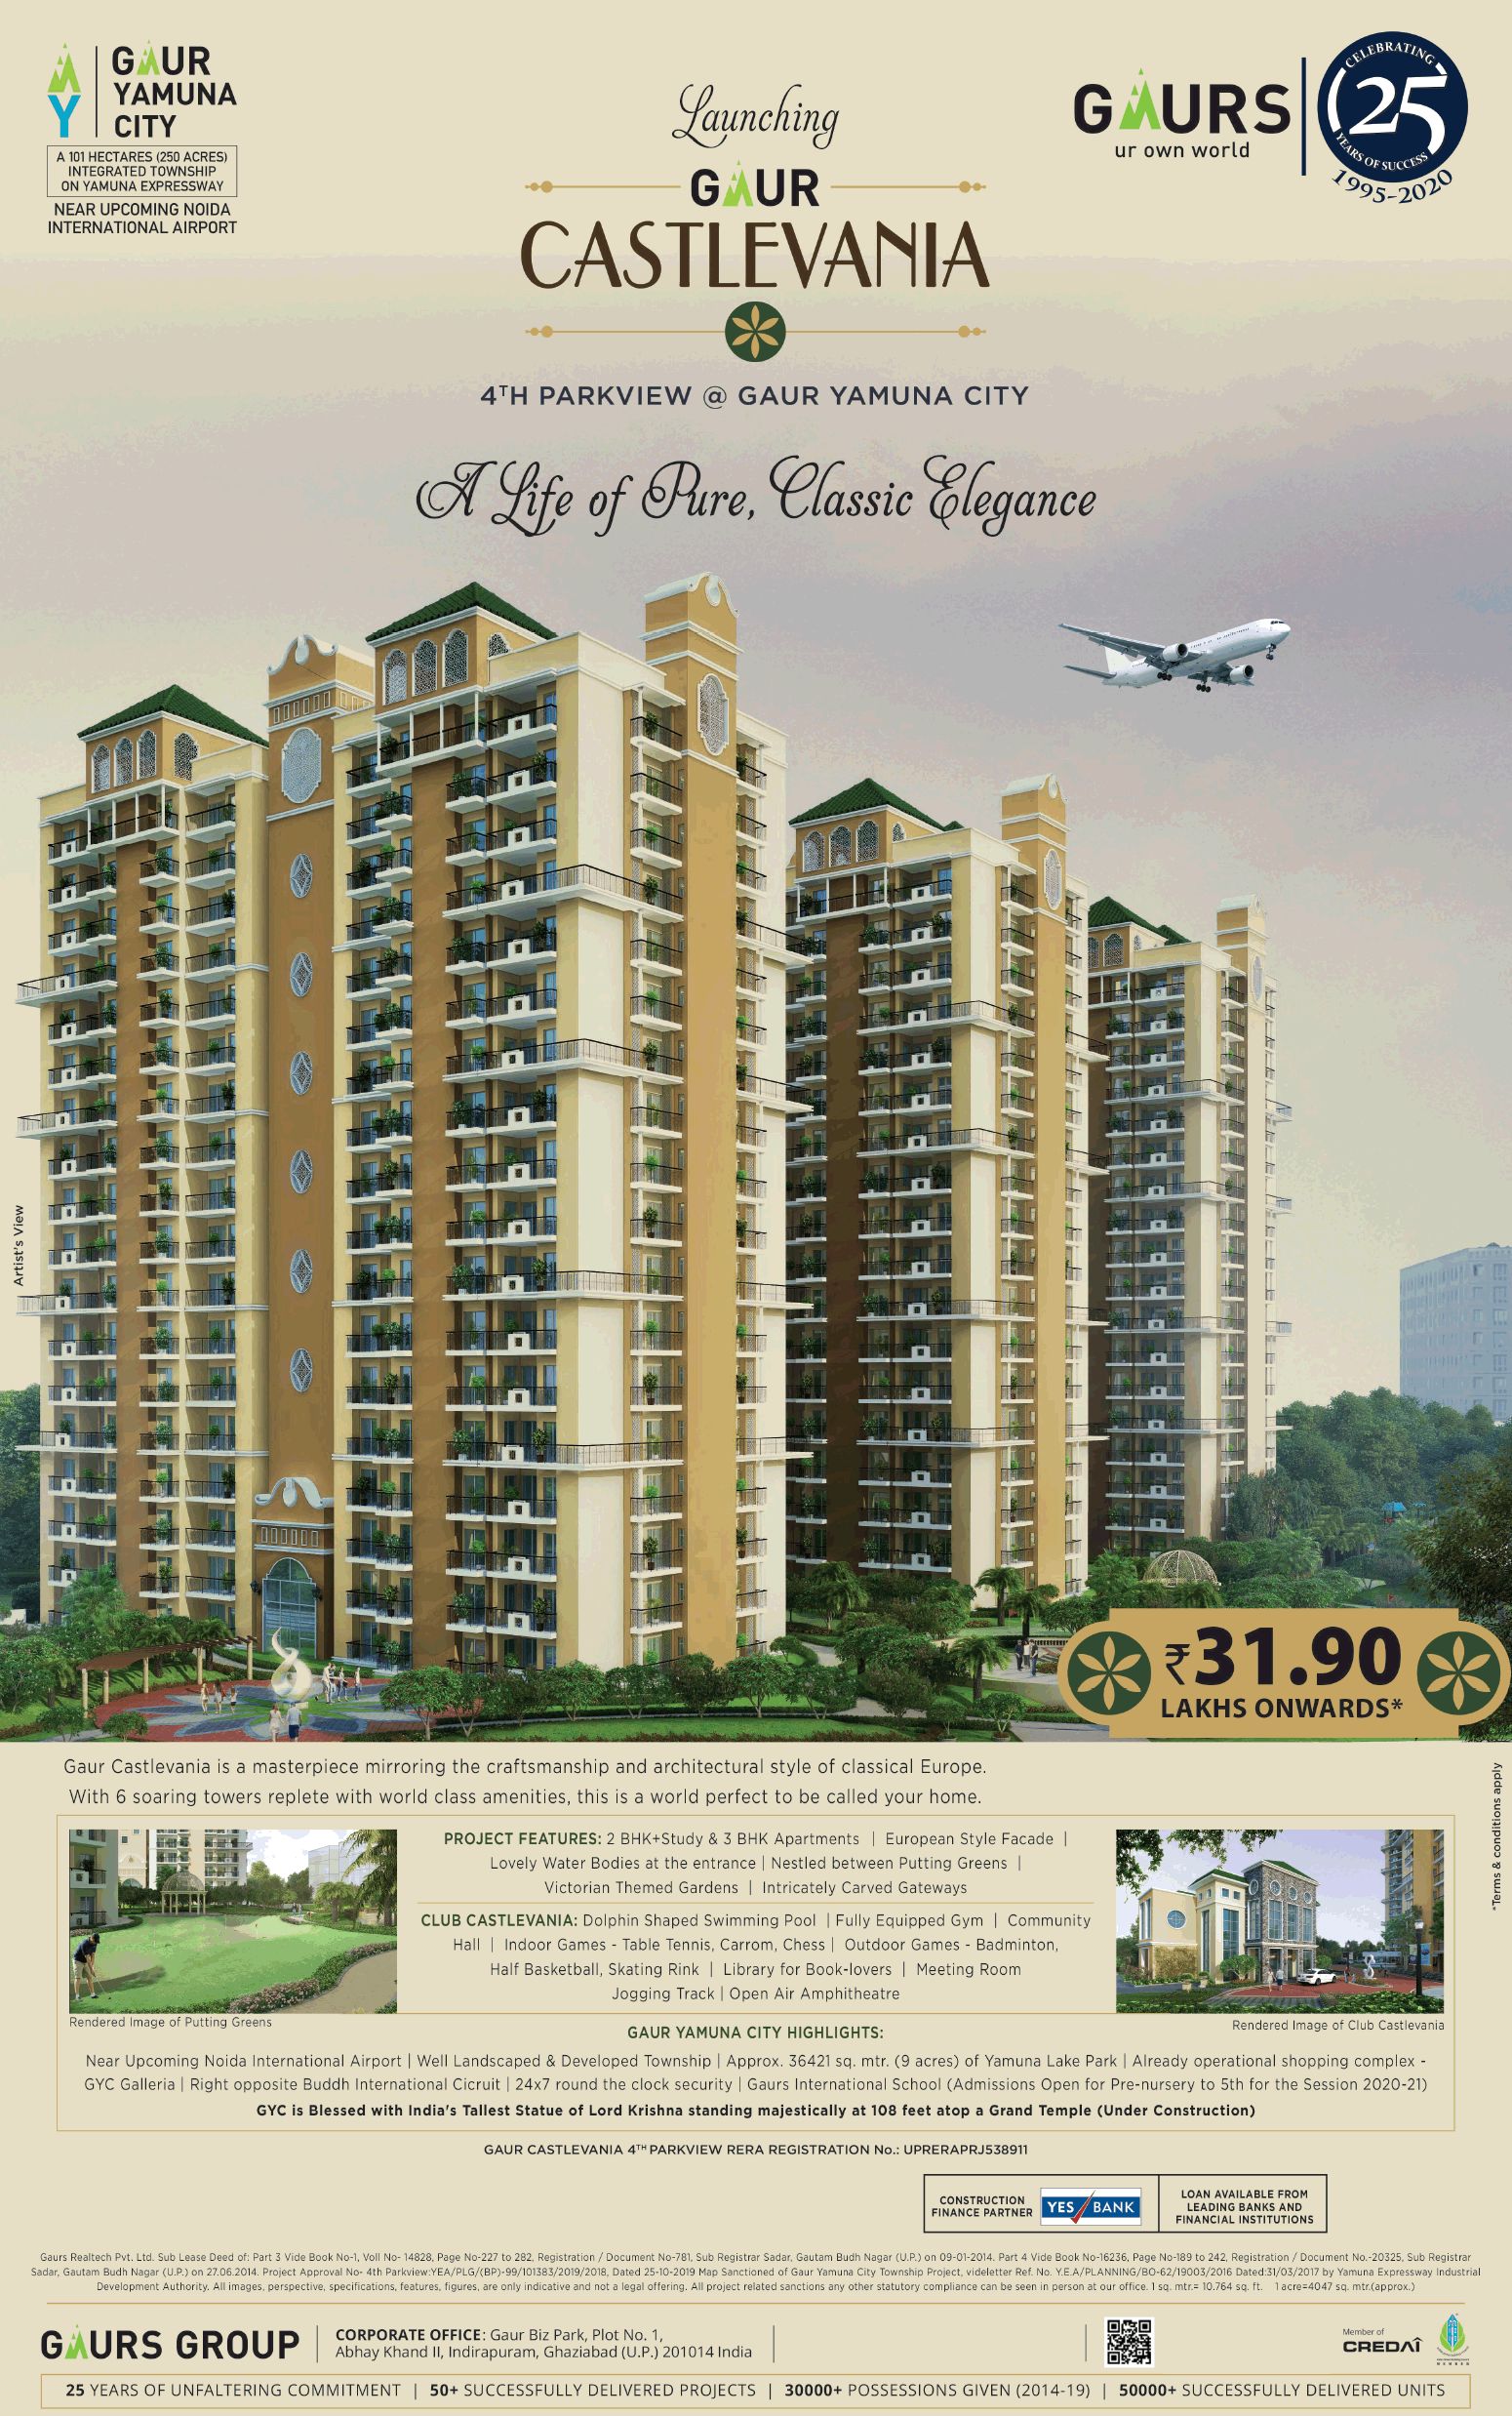 Prices starting Rs 31.90 Lac at Gaur Castlevania in Yamuna Expressway, Greater Noida Update